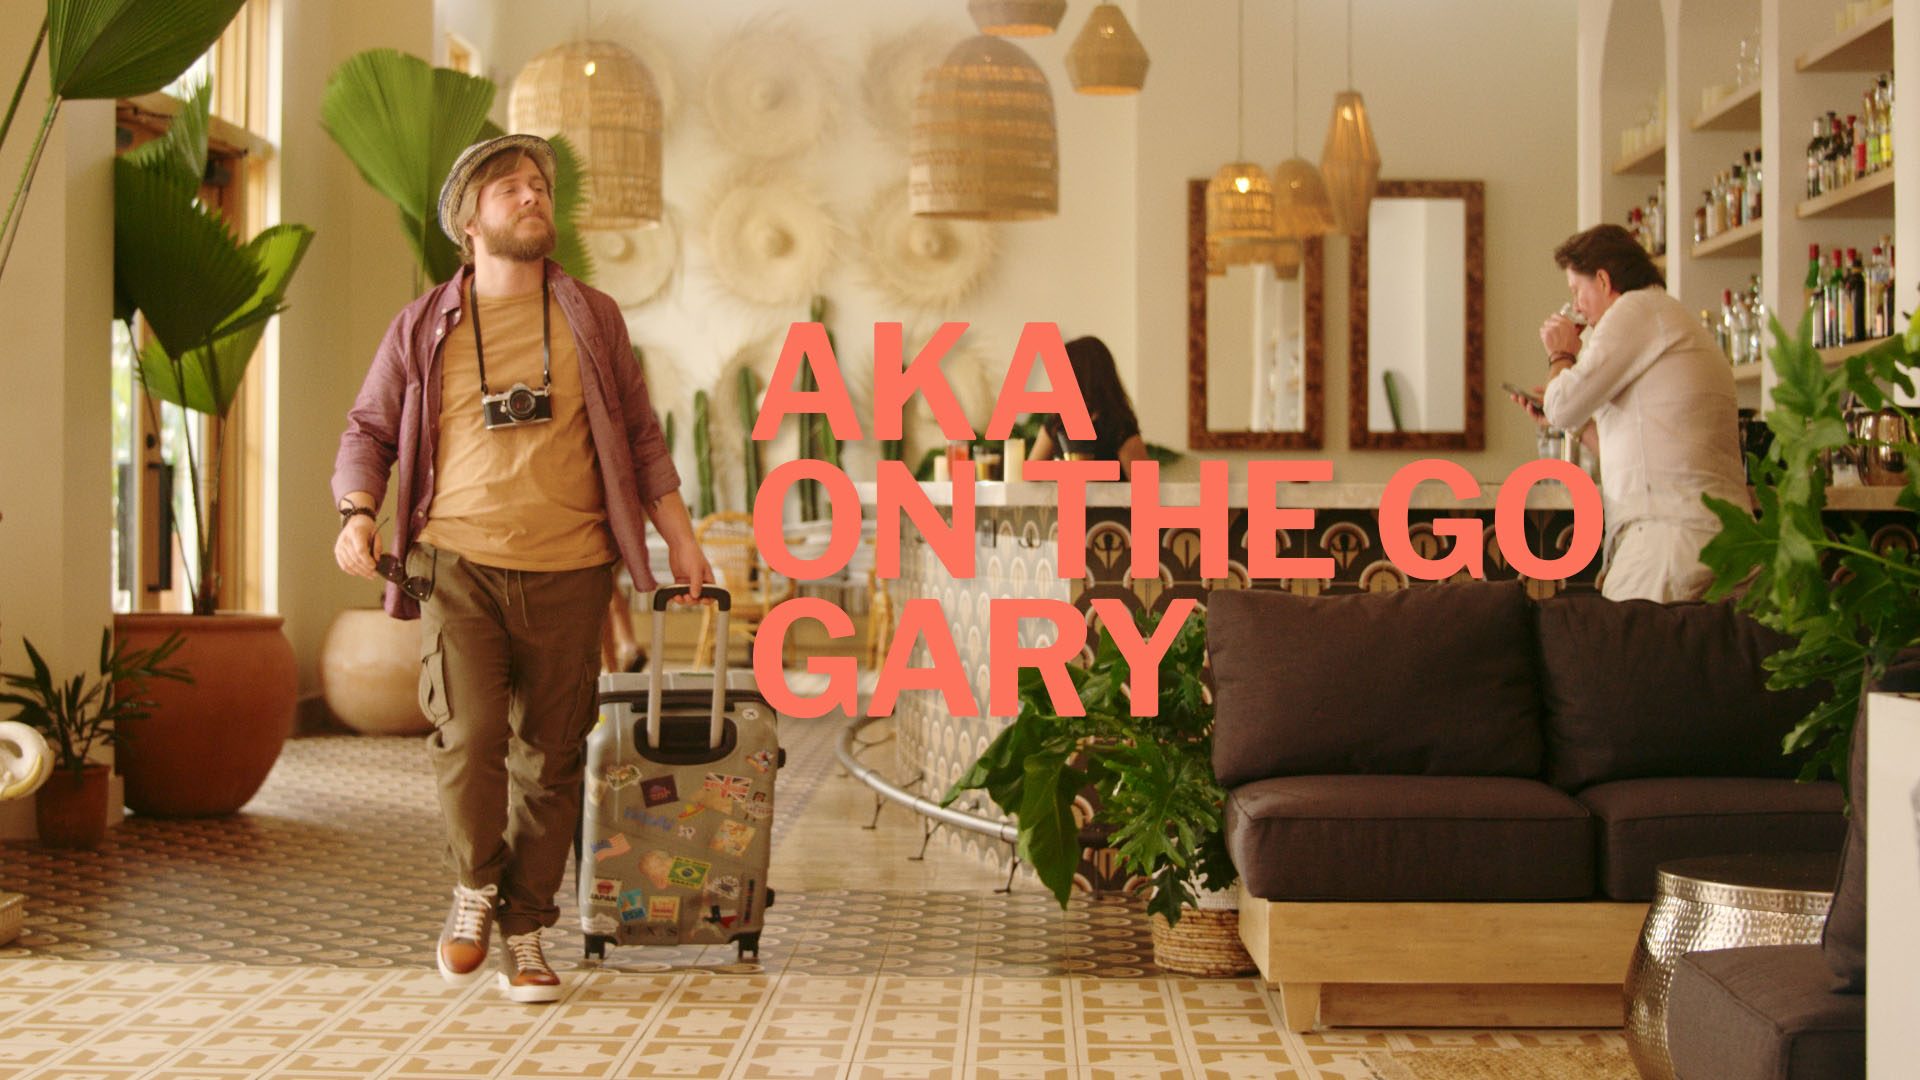 A man with a travel suitcase wlaking through the lobby of a hotel with the text "AKA on the go Gary."